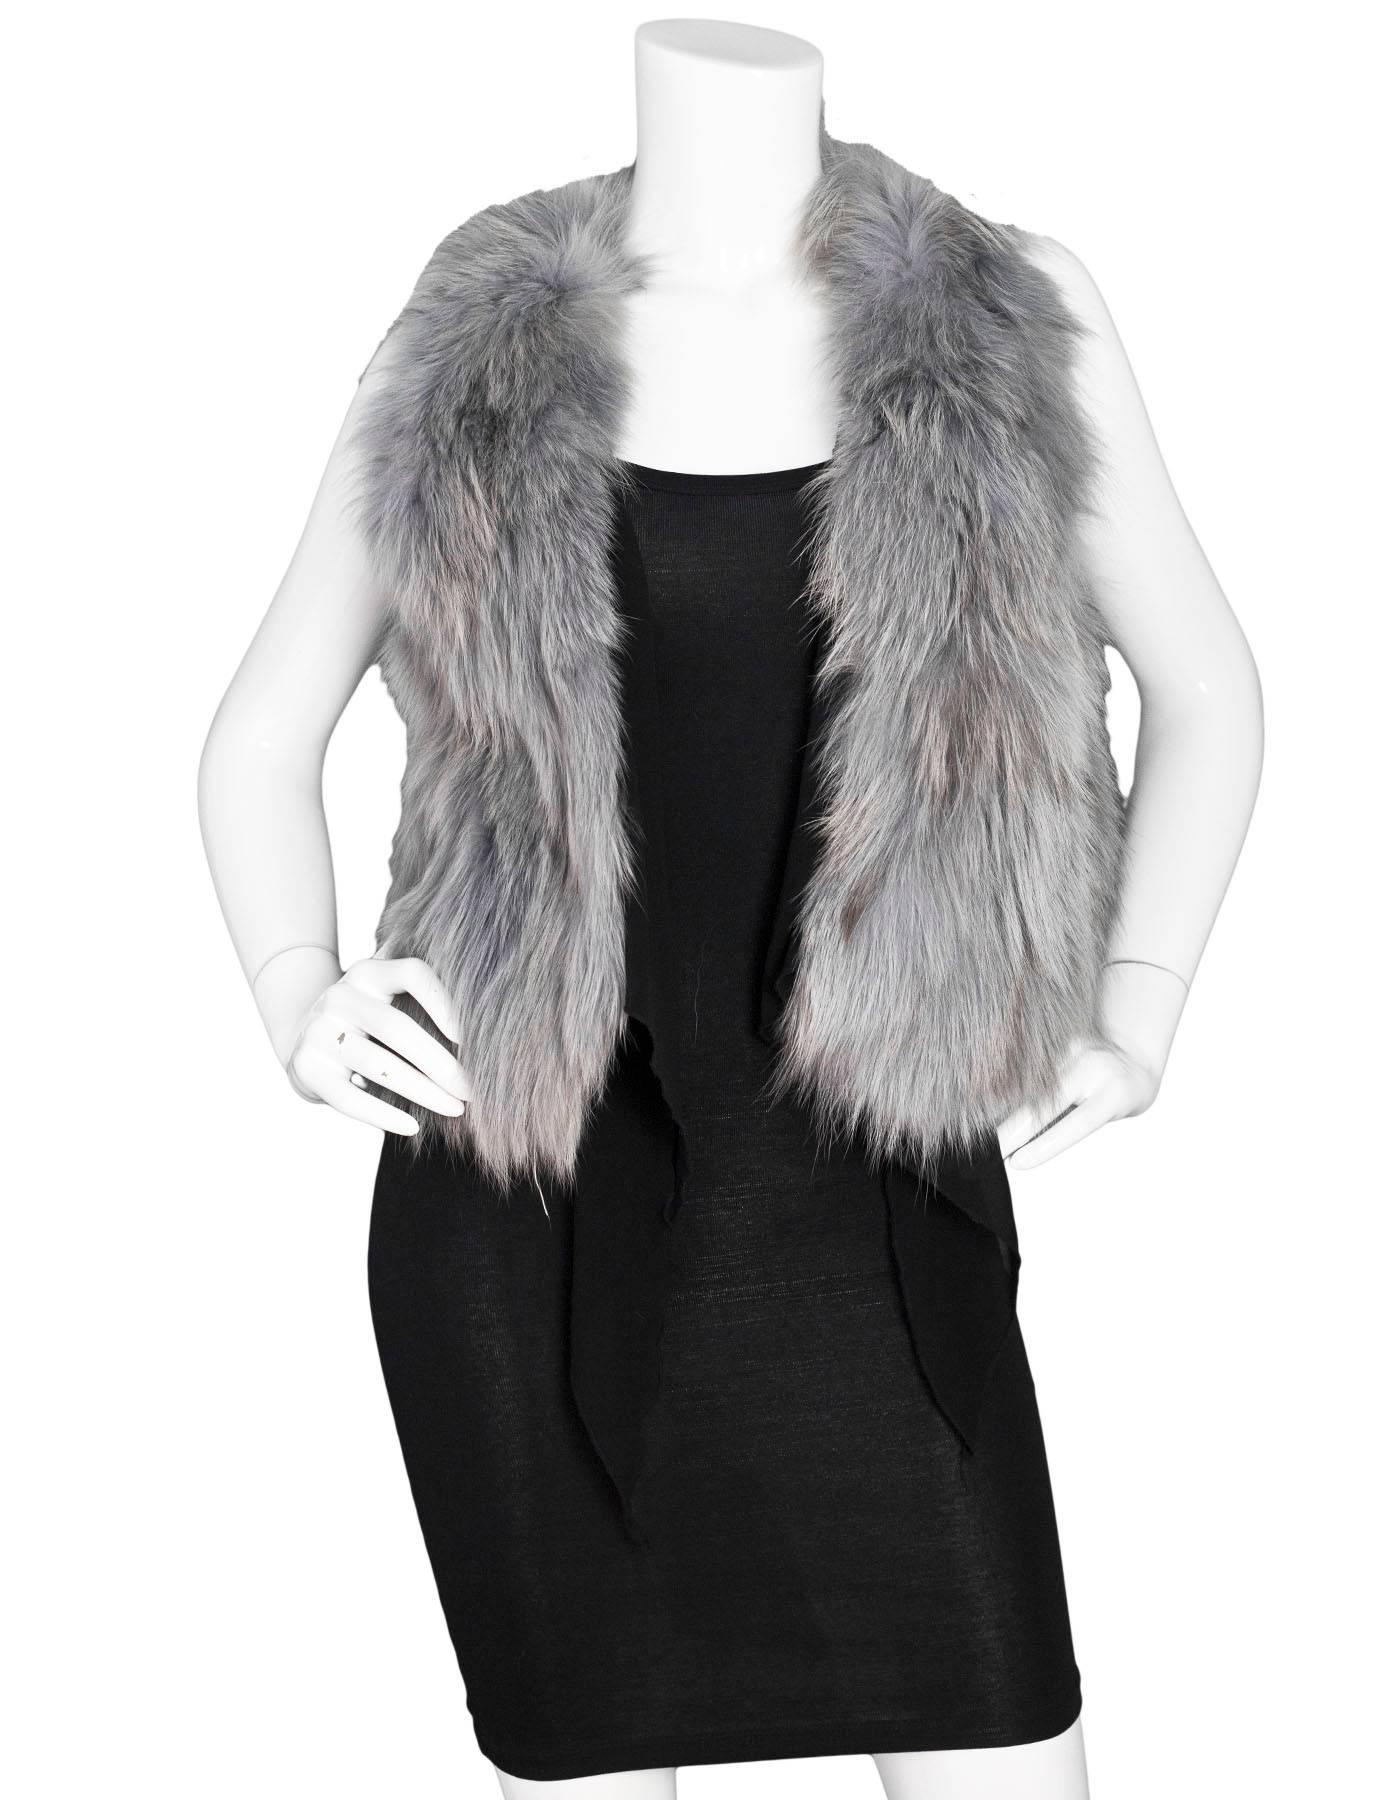 Grey Fox Fur Vest

Features black draping at front

Color: Grey
Composition: Fox
Lining: Textile
Closure/Opening: Open front
Exterior Pockets: None
Overall Condition: Excellent pre-owned condition, faint discoloration at front
Measurements:
Bust: